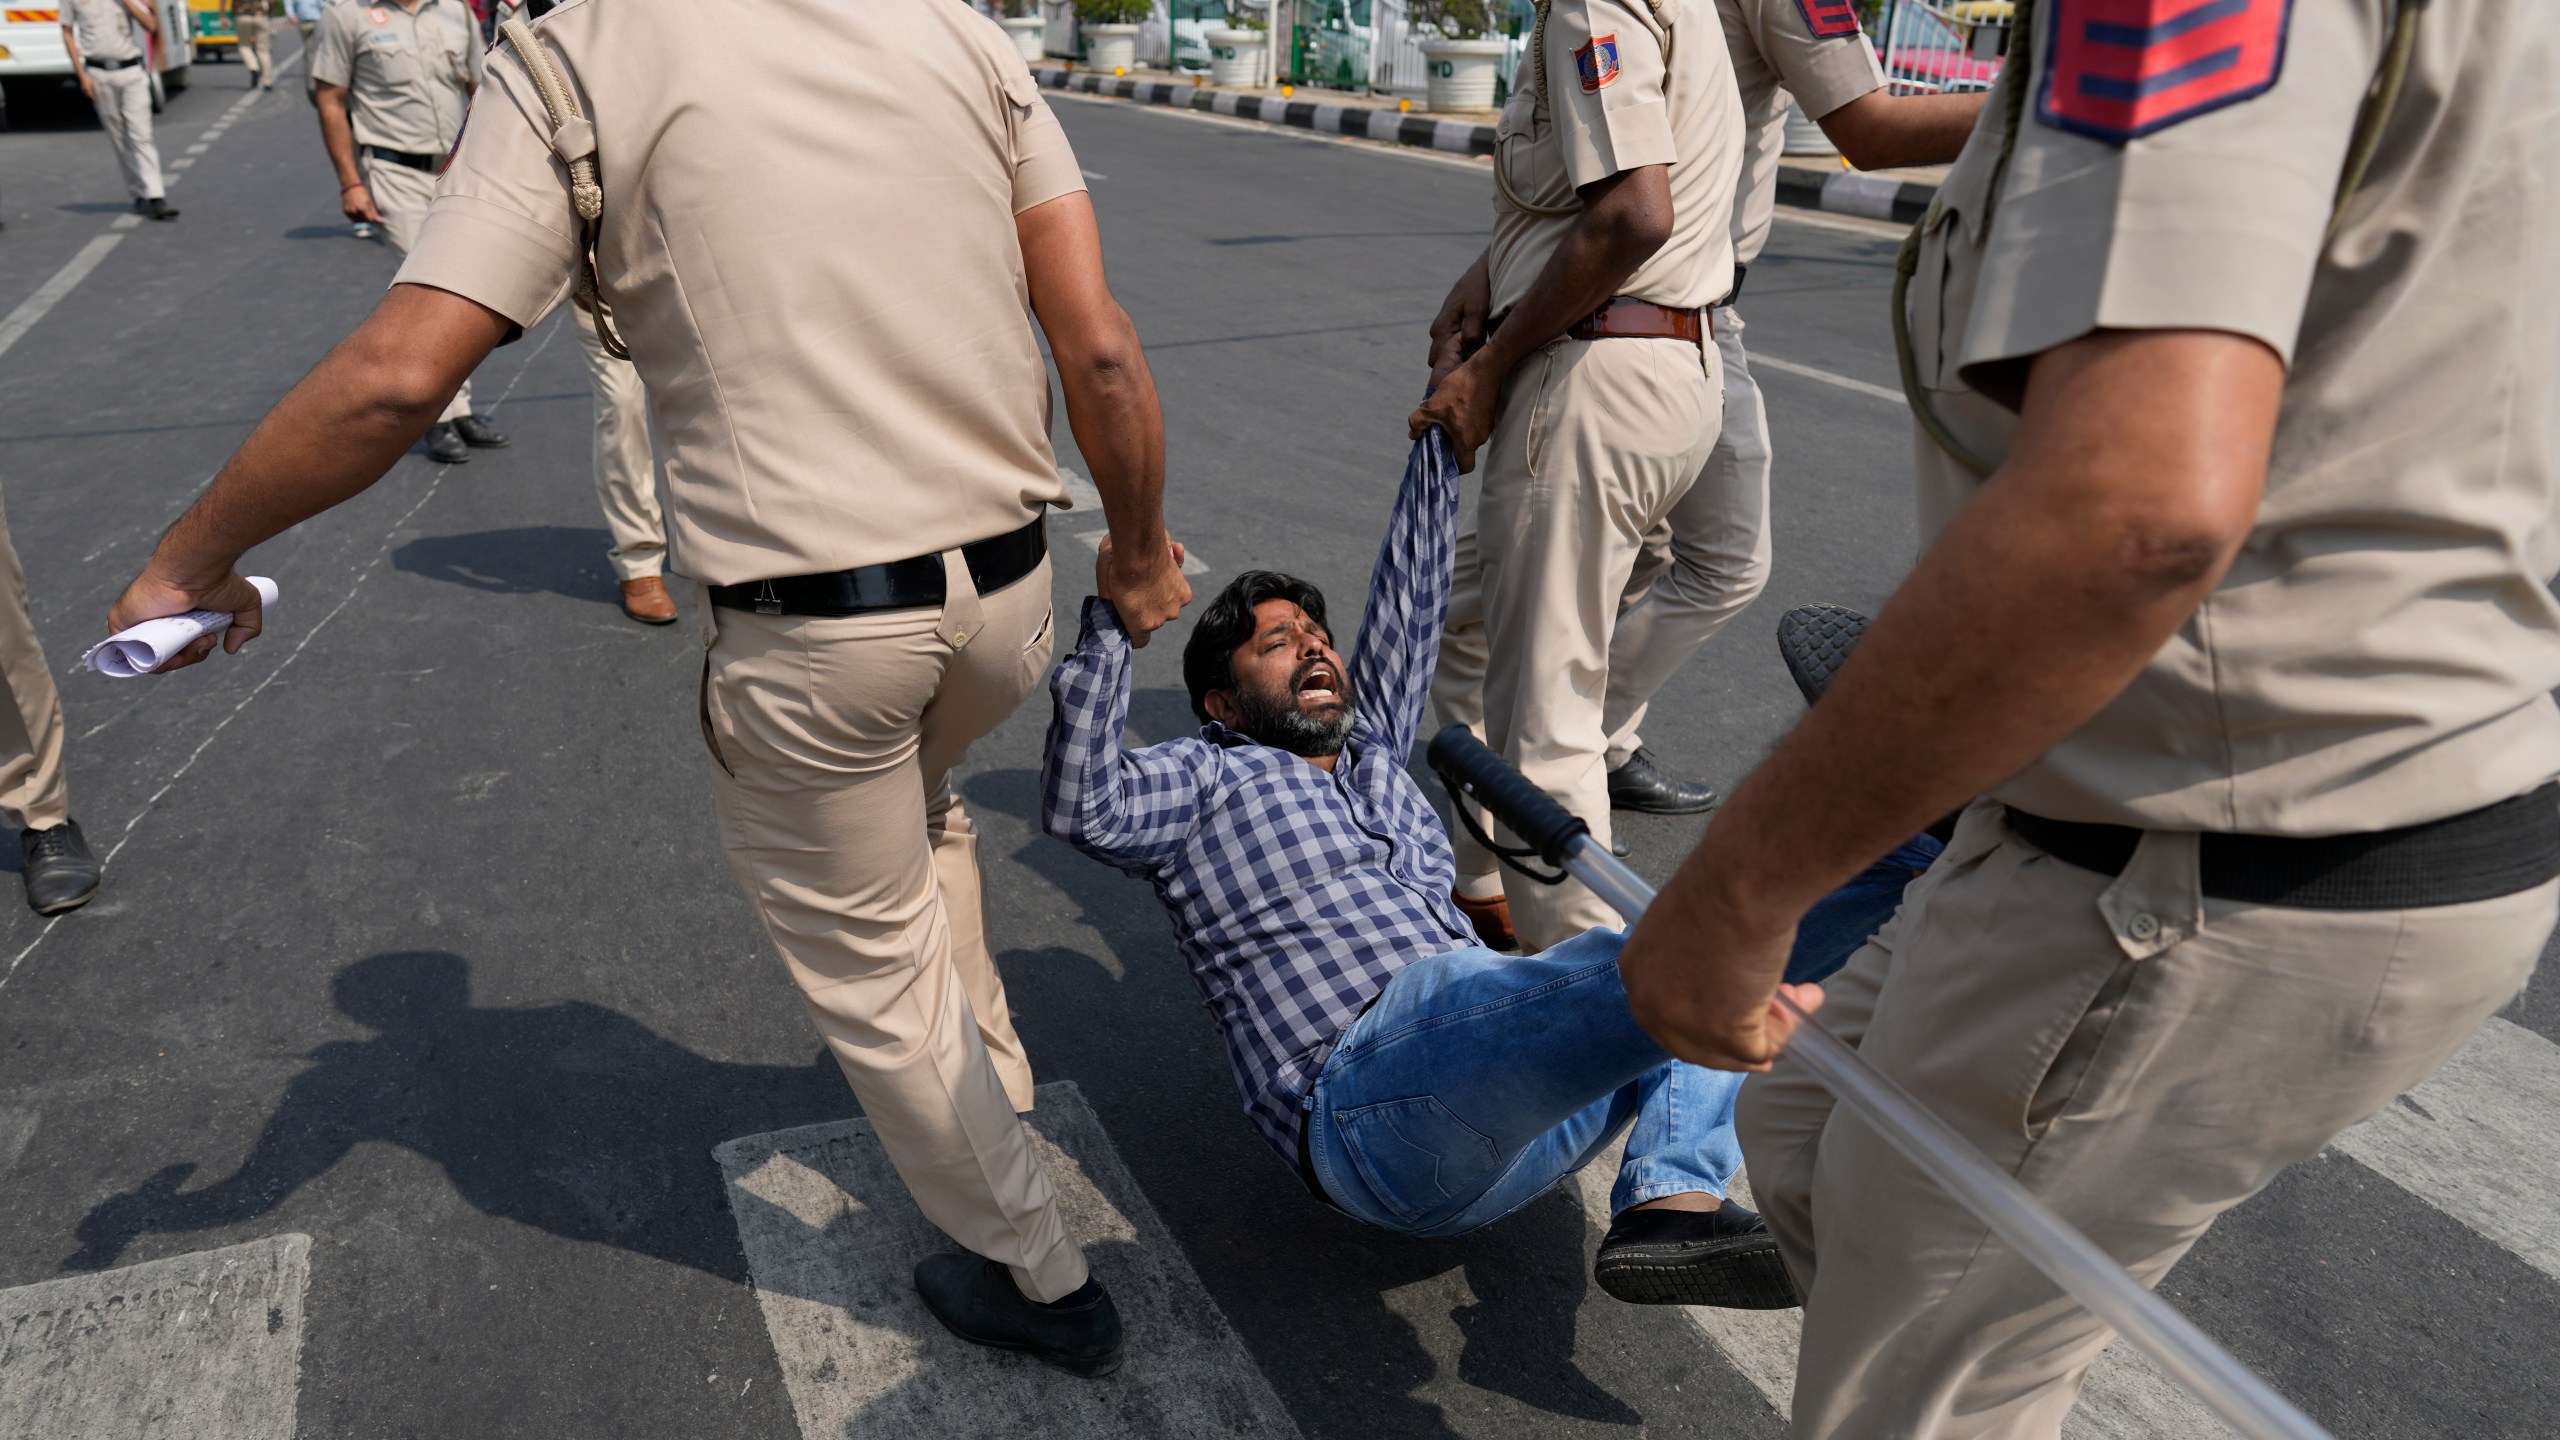 A supporter of Aam Admi Party, or Common Man's Party, is detained by the police officials during a protest against the arrest of their party leader Arvind Kejriwal, in New Delhi, India, Friday, March 22, 2024. Supporters of an anti-corruption crusader and one of India's most consequential politicians of the last decade in India held protests Friday against his arrest, which opposition parties say is part of a crackdown by Prime Minister Narendra Modi's government before national elections. (AP Photo/Manish Swarup)